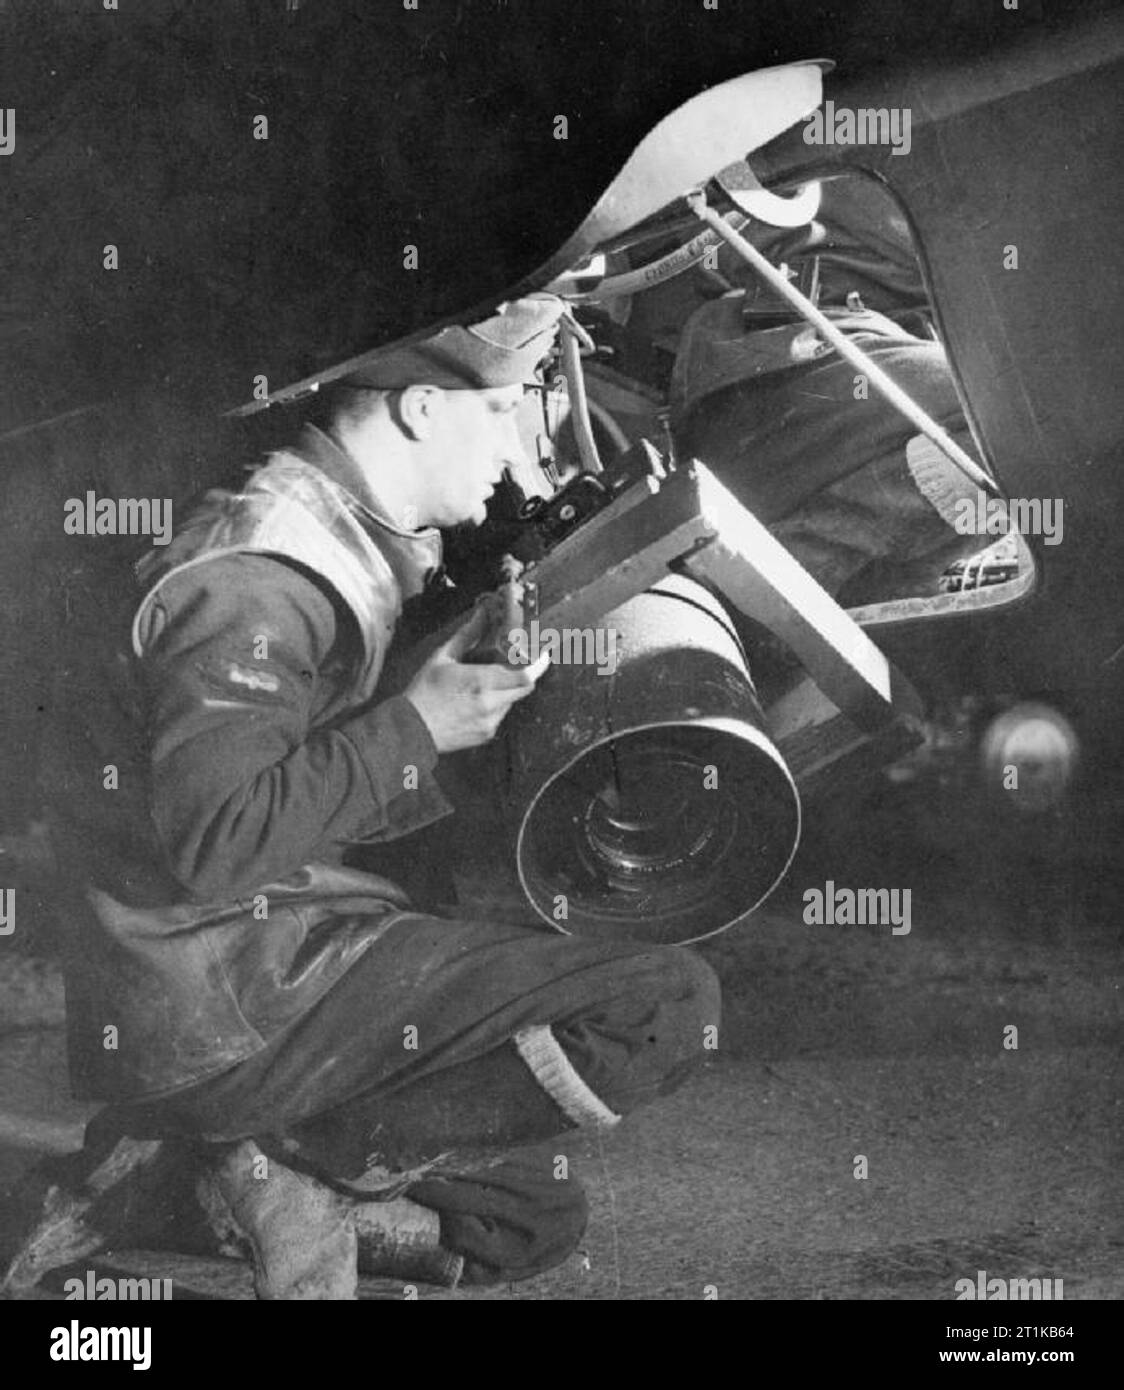 Royal Air Force- 2nd Tactical Air Force, 1943-1945. Leading Aircraftman C Barnham of Winchmore Hill, London, loads a Fairchild K-19B (12-inch focal length lens) night aerial camera into a De Havilland Mosquito PR Mark XVI of No. 140 Squadron RAF, at B58/ Melsbroek, Belgium, before a night photographic-reconnaissance sortie. Stock Photo